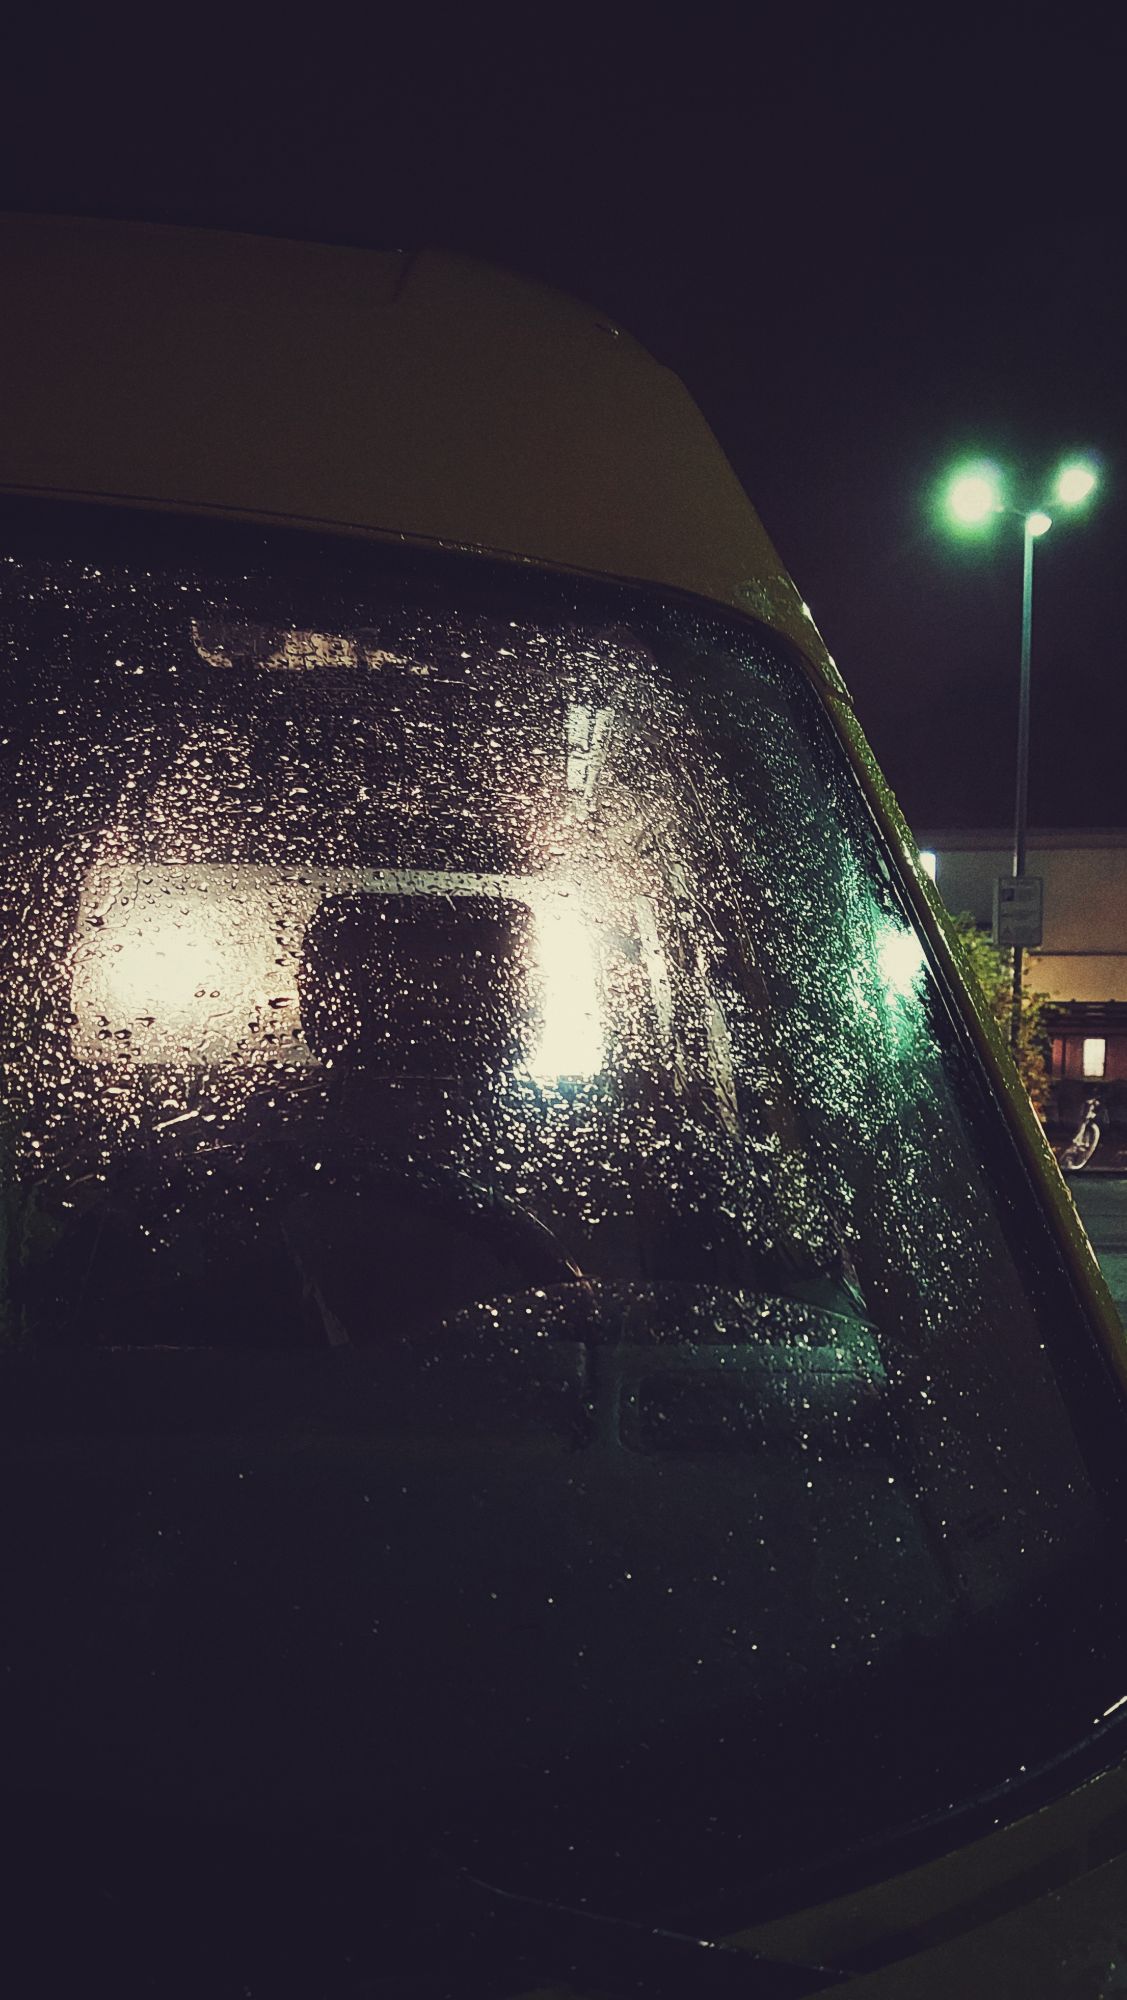 A windscreen of a car, with raindrops spilled over.